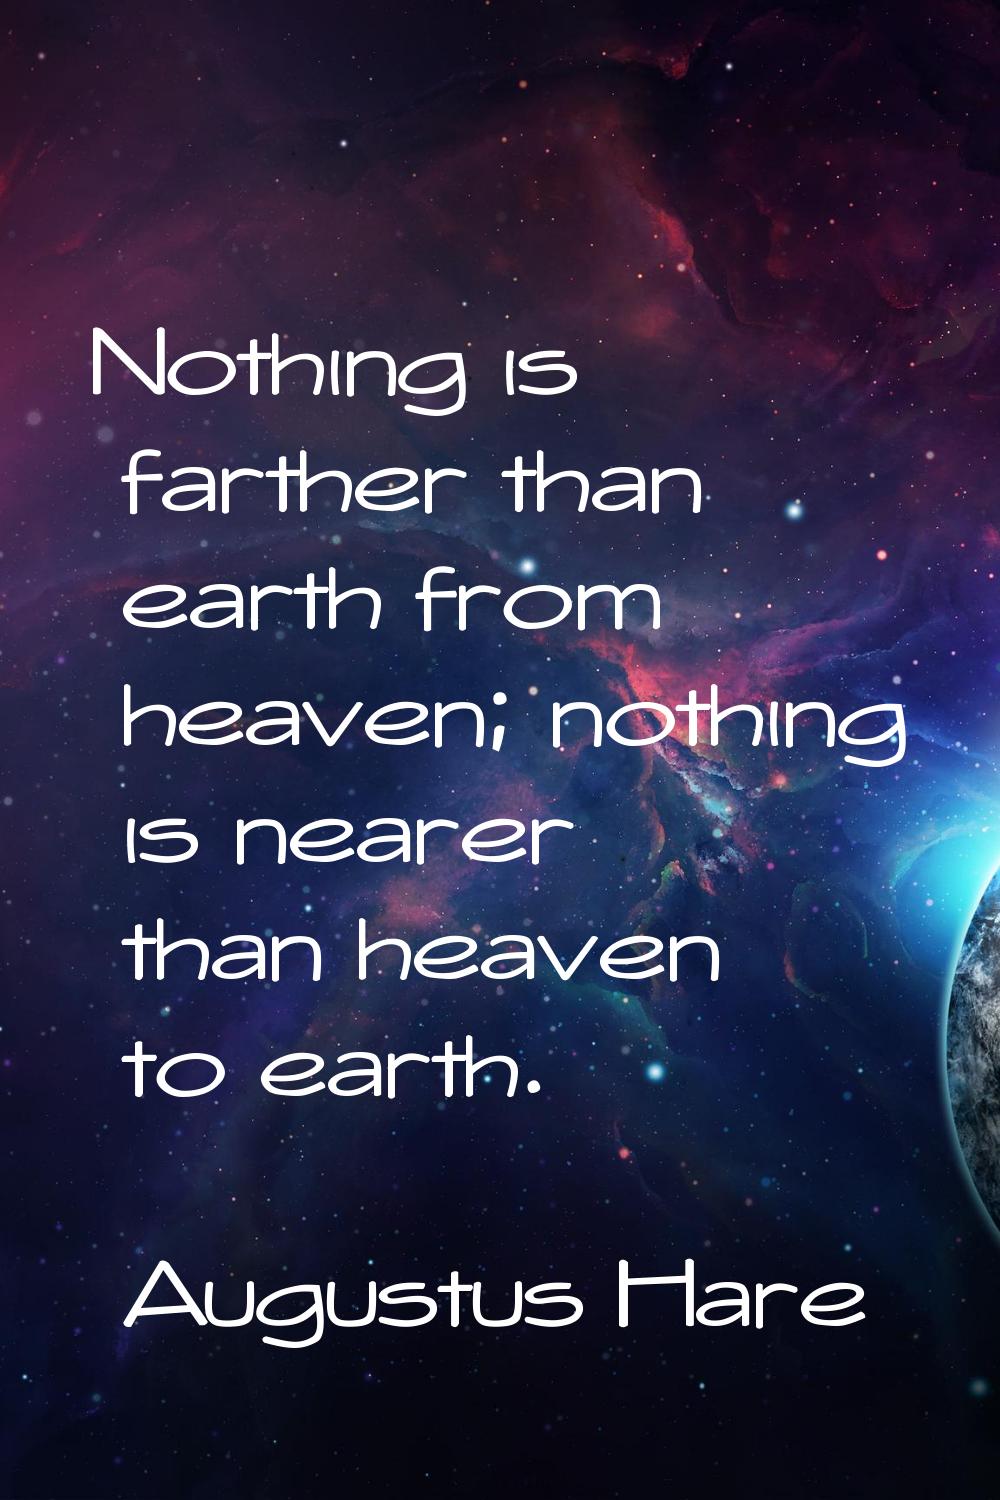 Nothing is farther than earth from heaven; nothing is nearer than heaven to earth.